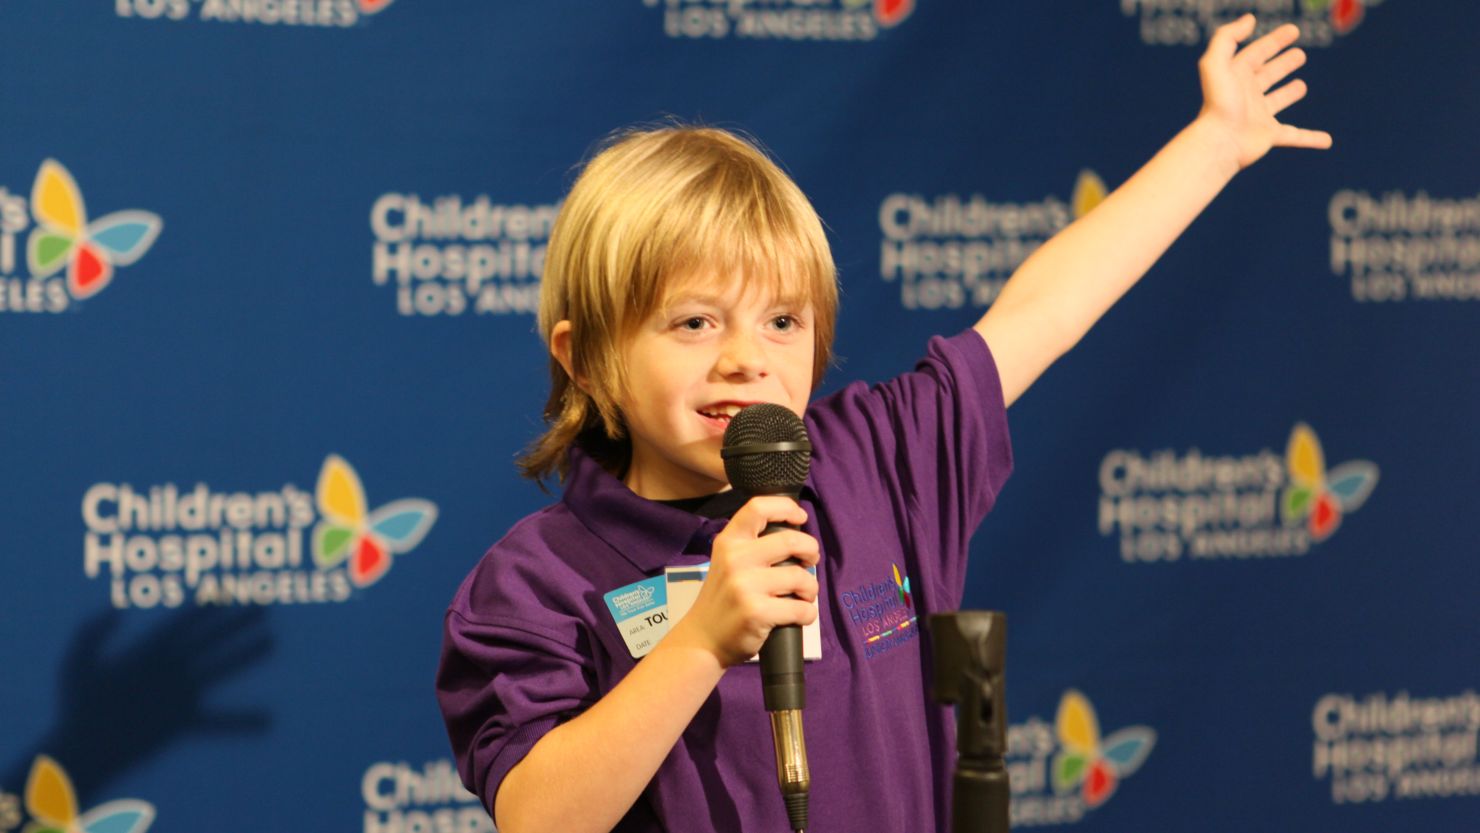 Max Page helps raise awareness for kids in need via the Junior Ambassadors Program for Children's Hospital Los Angeles.